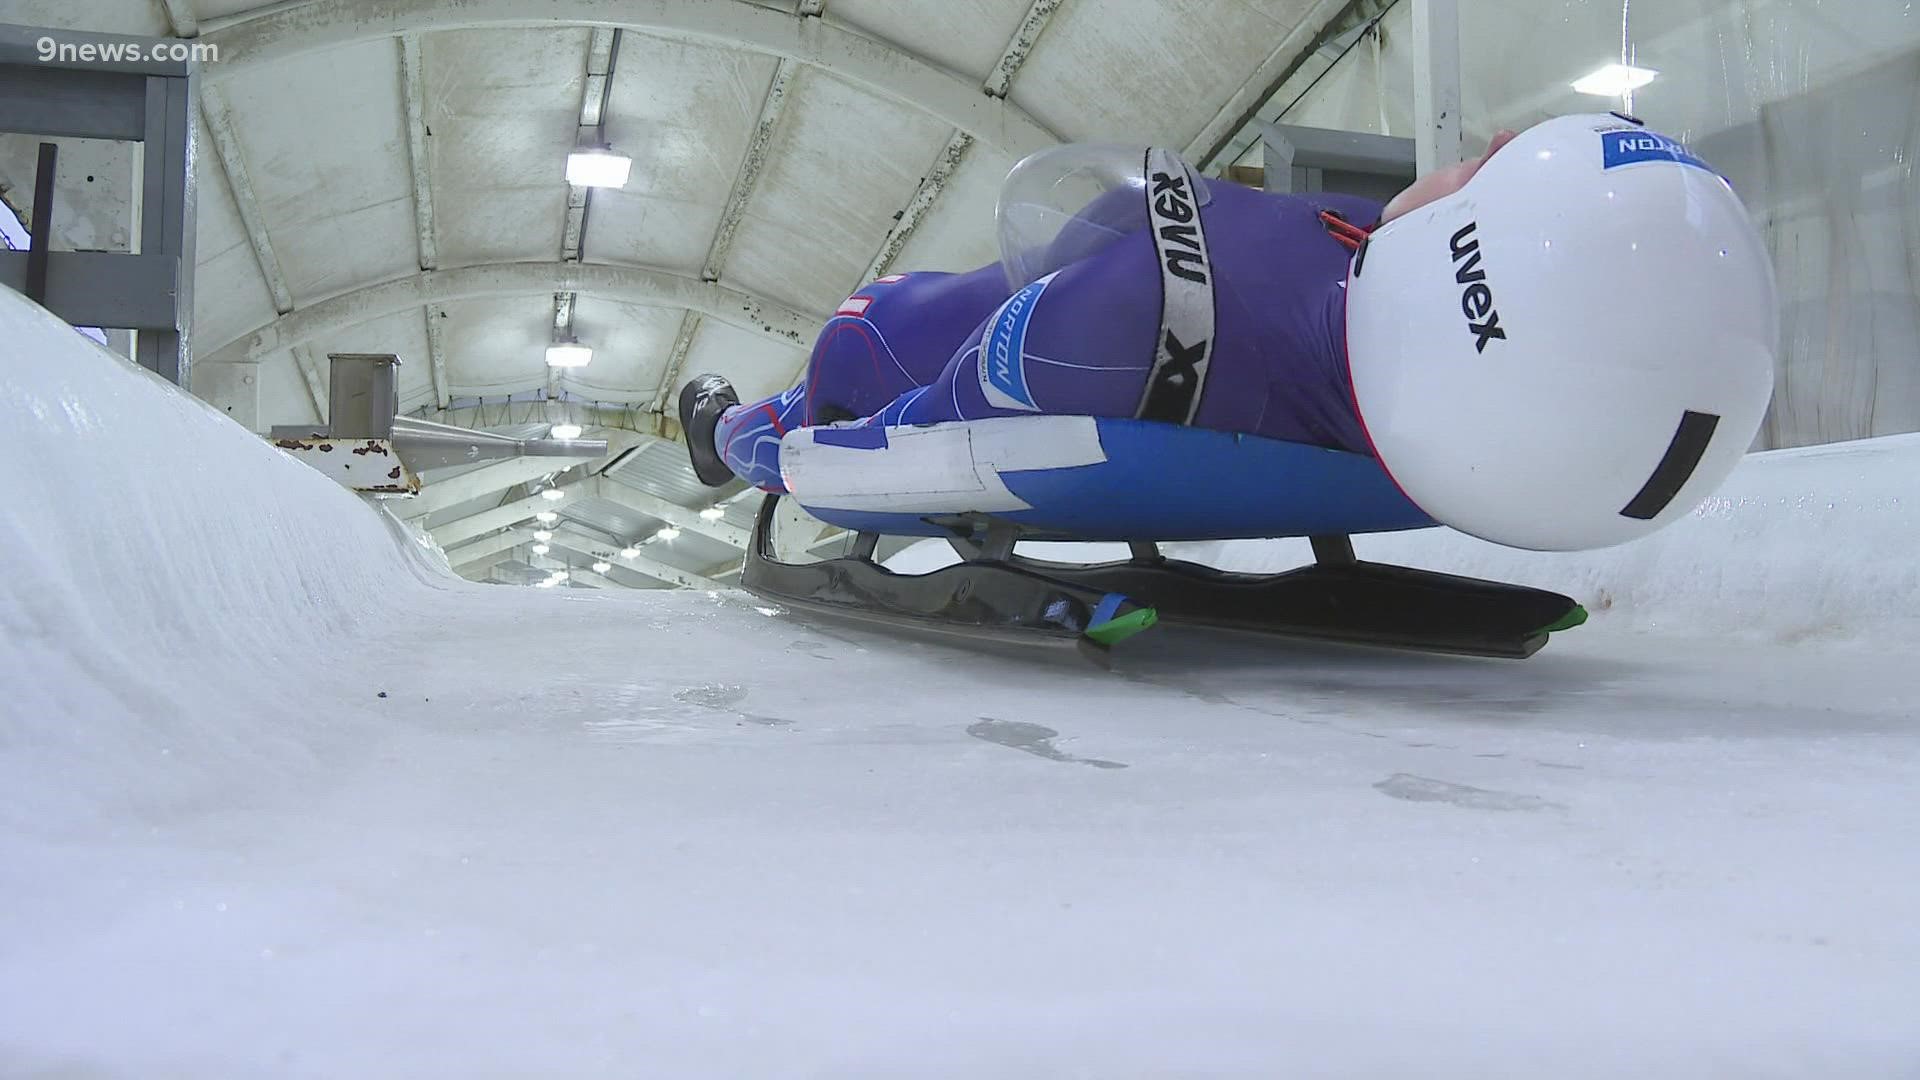 At the Olympic level, the sled itself is just as important as the slider who takes it to the finish line.